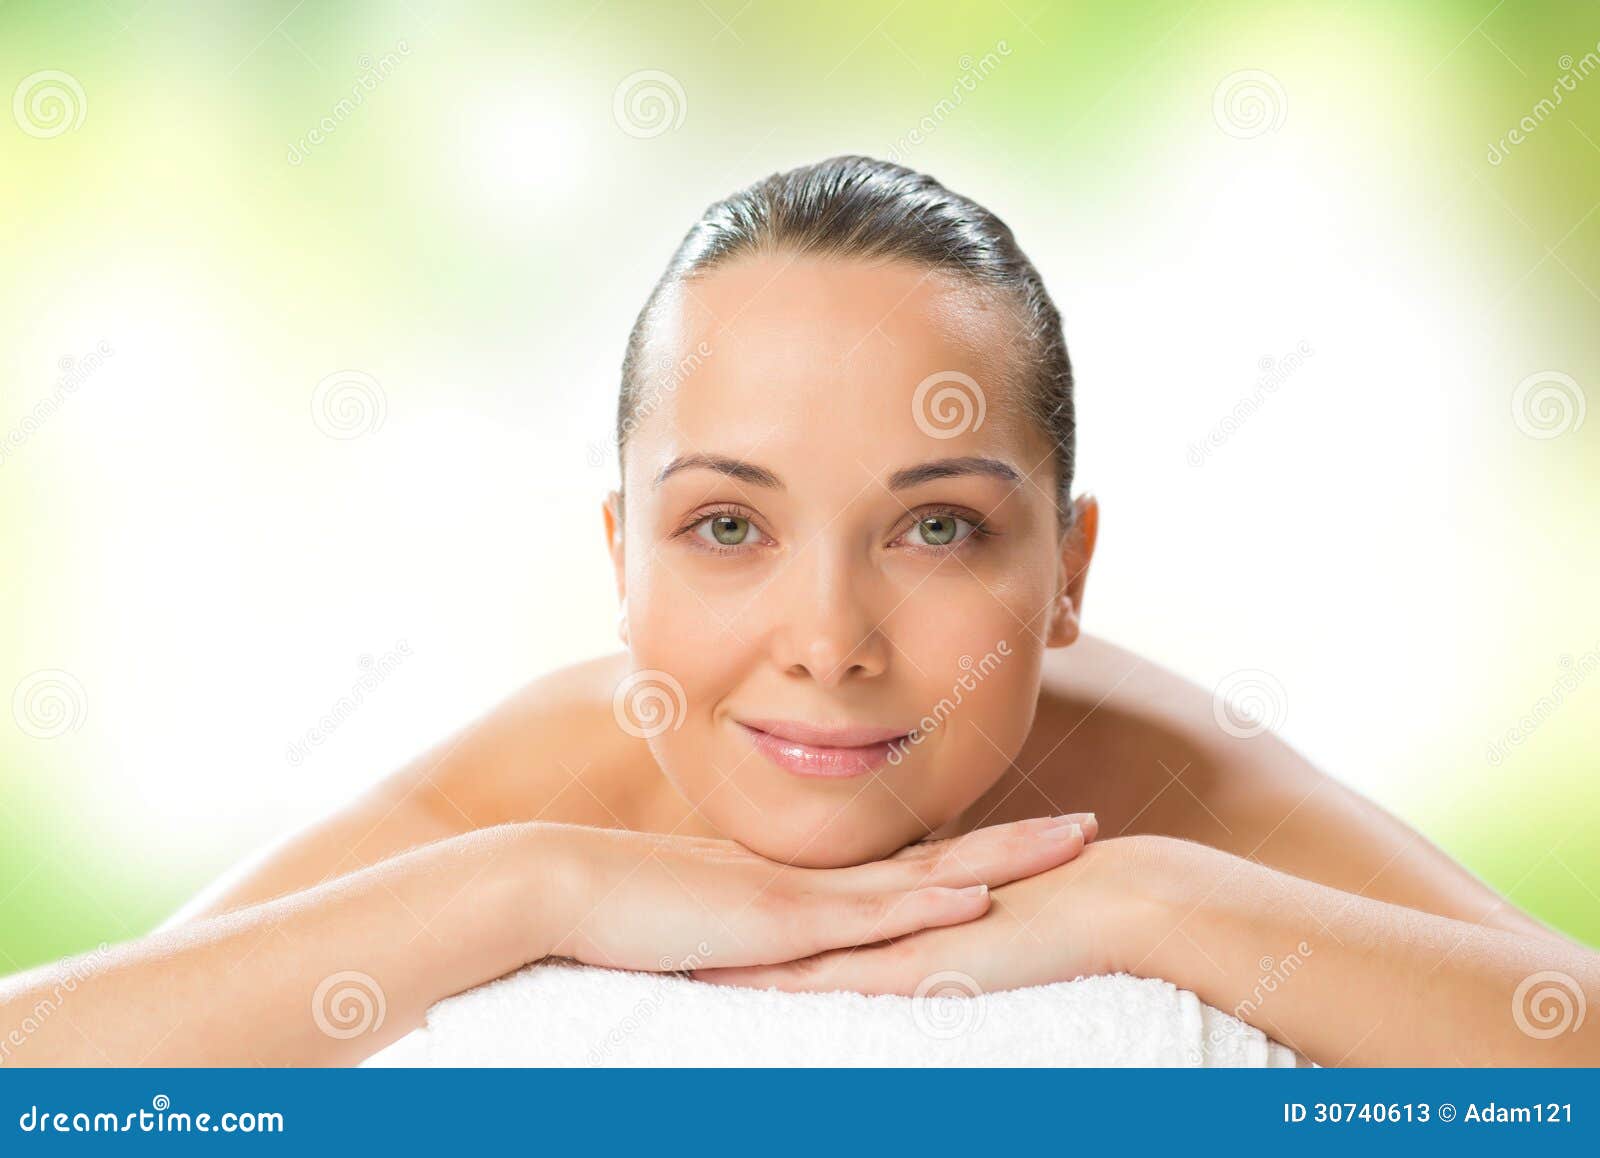 Close Up Portrait Of A Beautiful Spa Woman Stock Image Image Of Aroma Cleansing 30740613